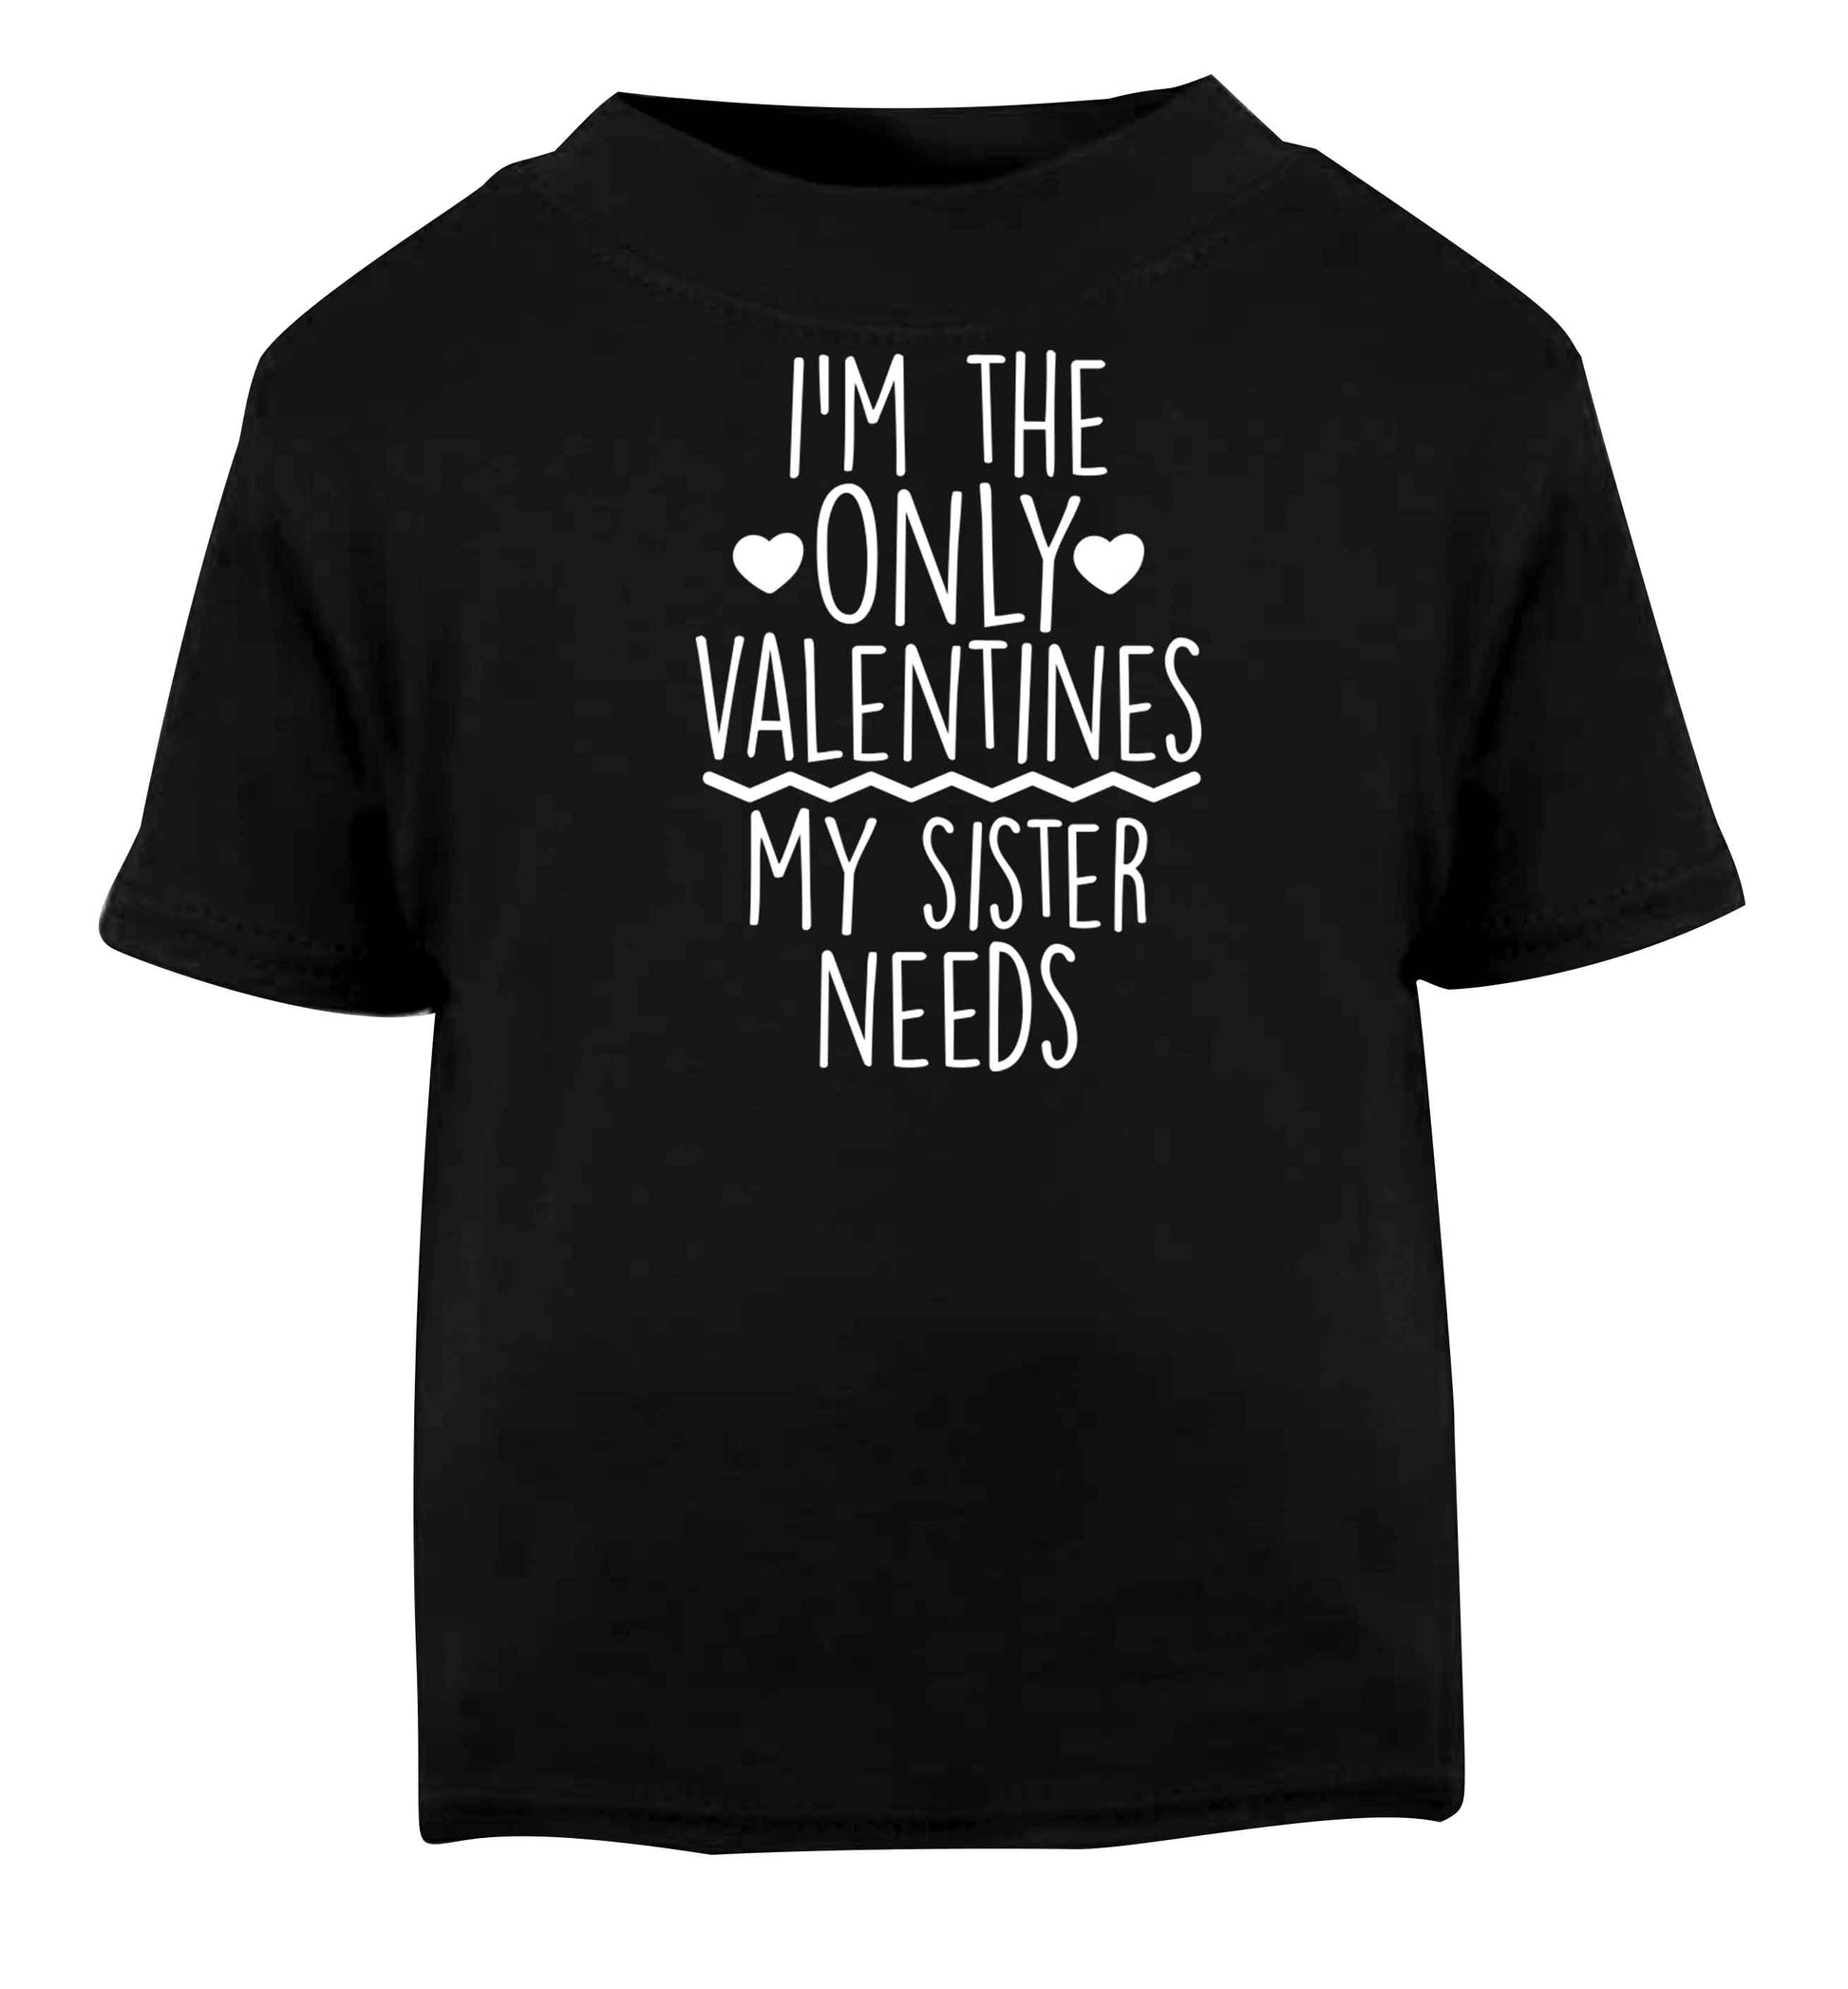 I'm the only valentines my sister needs Black baby toddler Tshirt 2 years